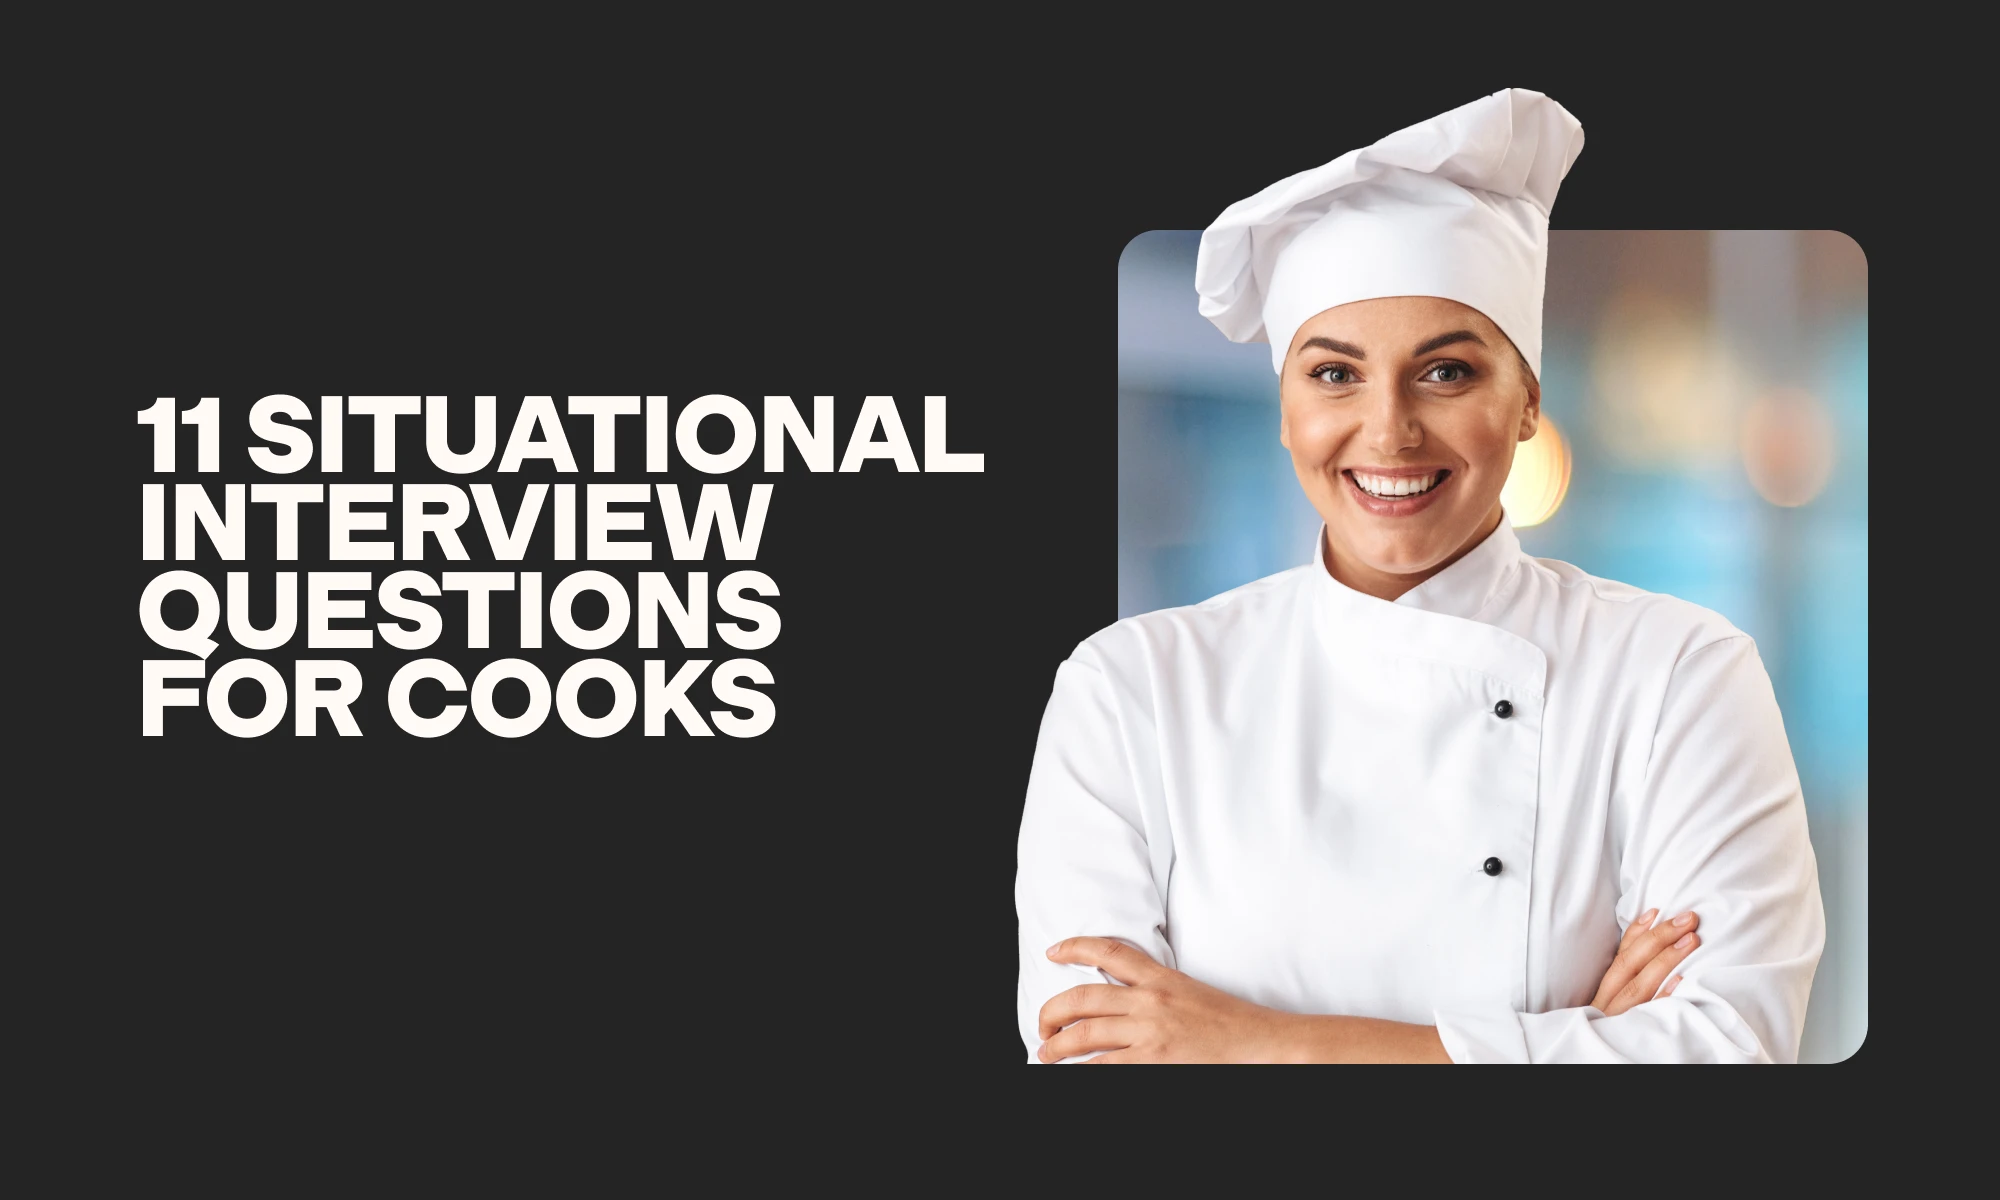 11 situational interview questions for cooks